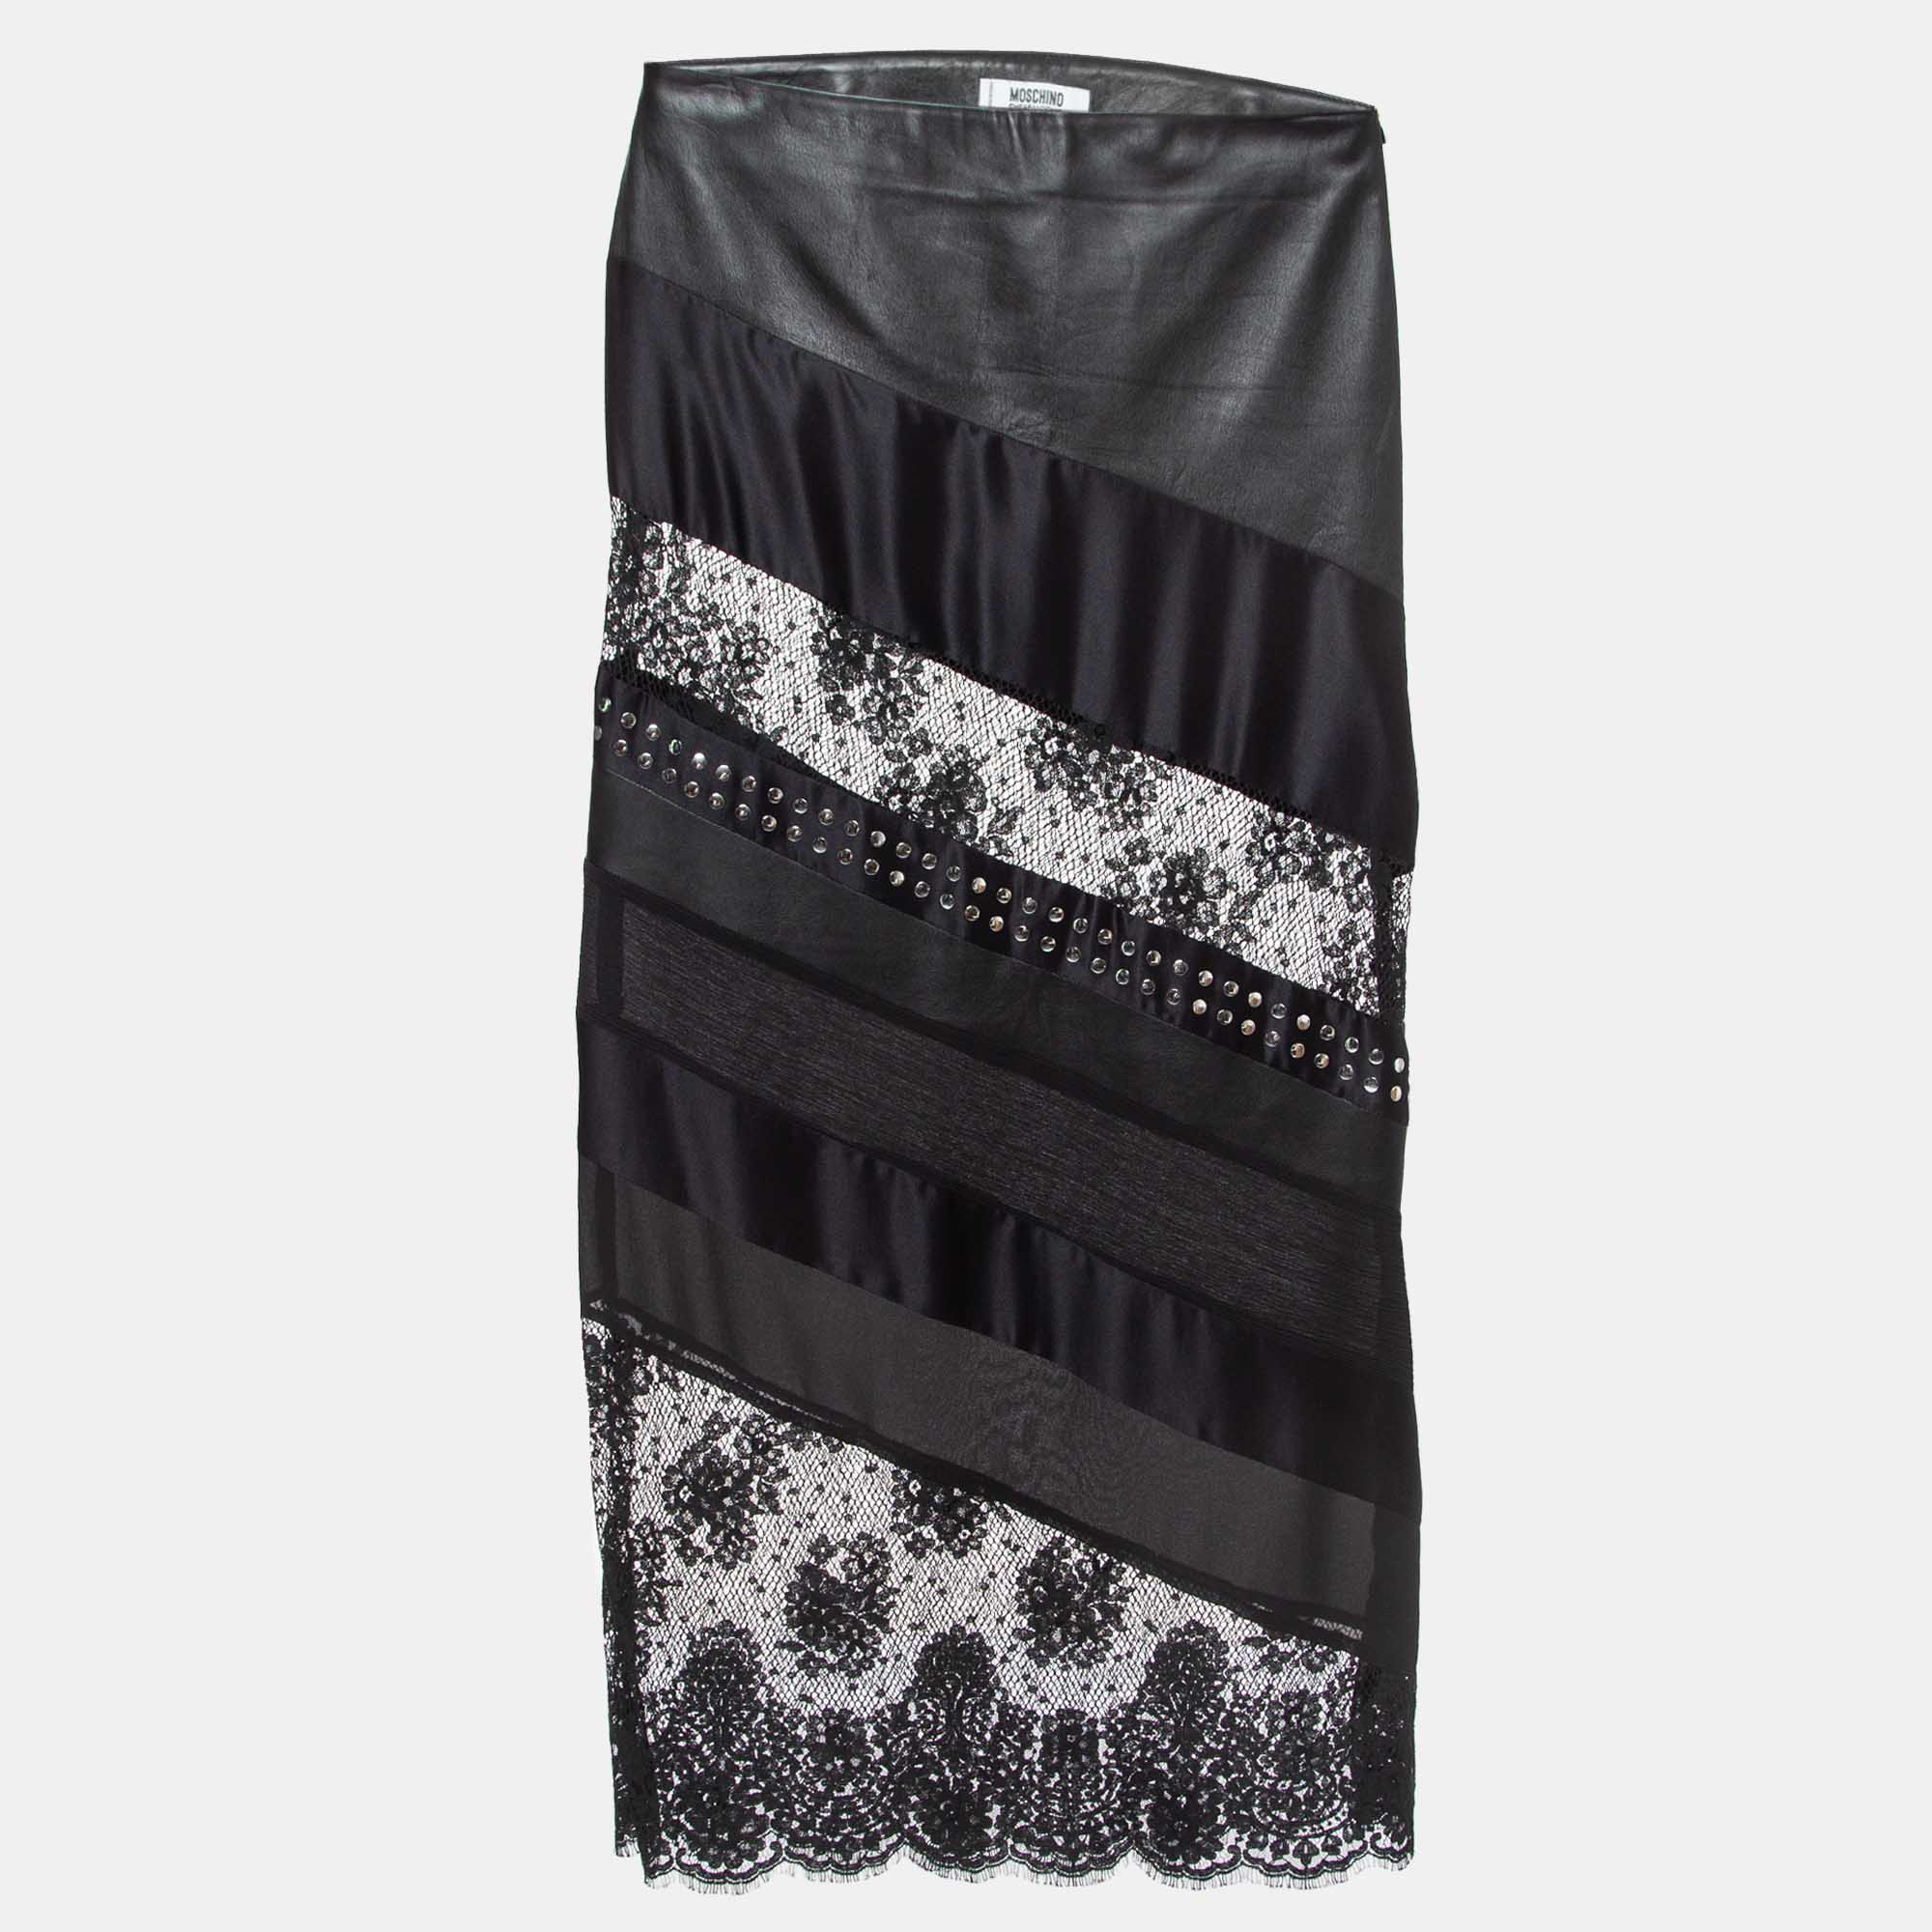 

Moschino Cheap and Chic Black Studded Satin & Faux Leather Maxi Skirt